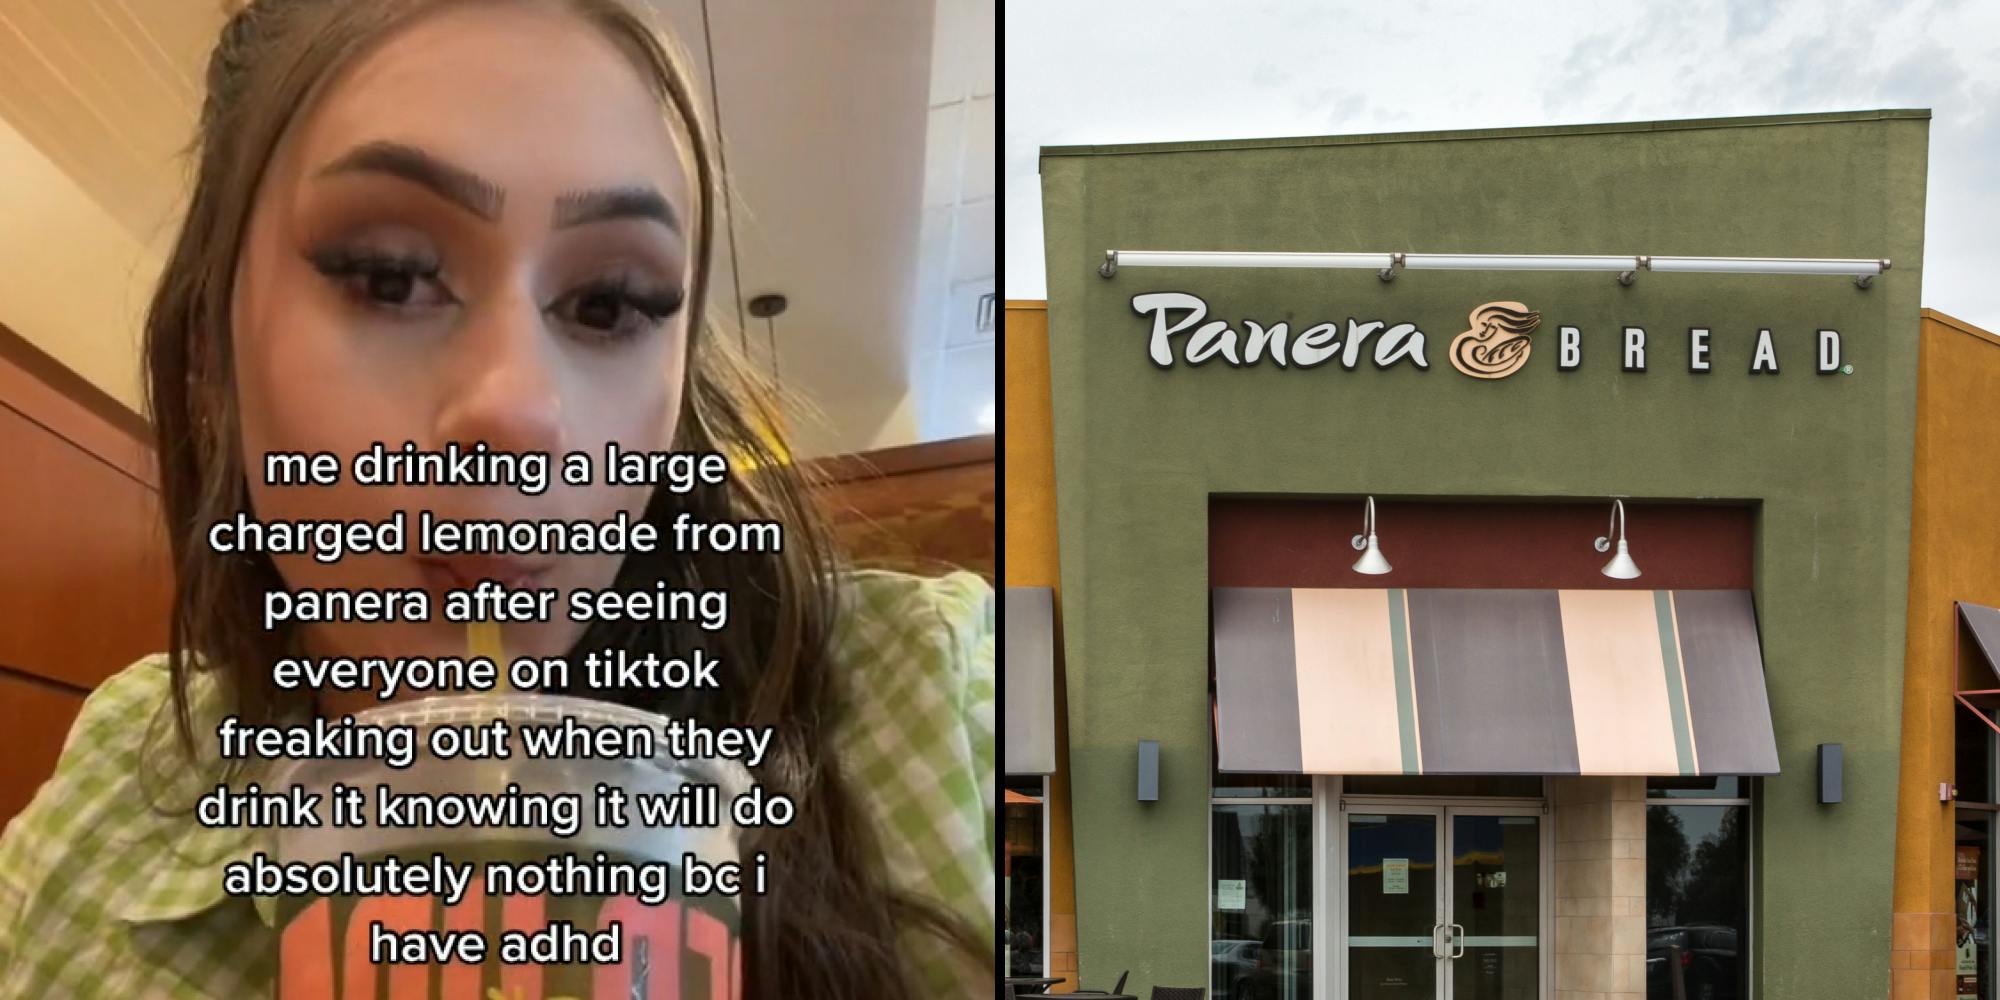 woman sipping lemonade at Panera caption "me drinking a large charged lemonade from panera after seeing everyone on tiktok freaking out when they drink it knowing it will do absolutely nothing bc i have adhd" (l) Panera Bread restaurant exterior (r)